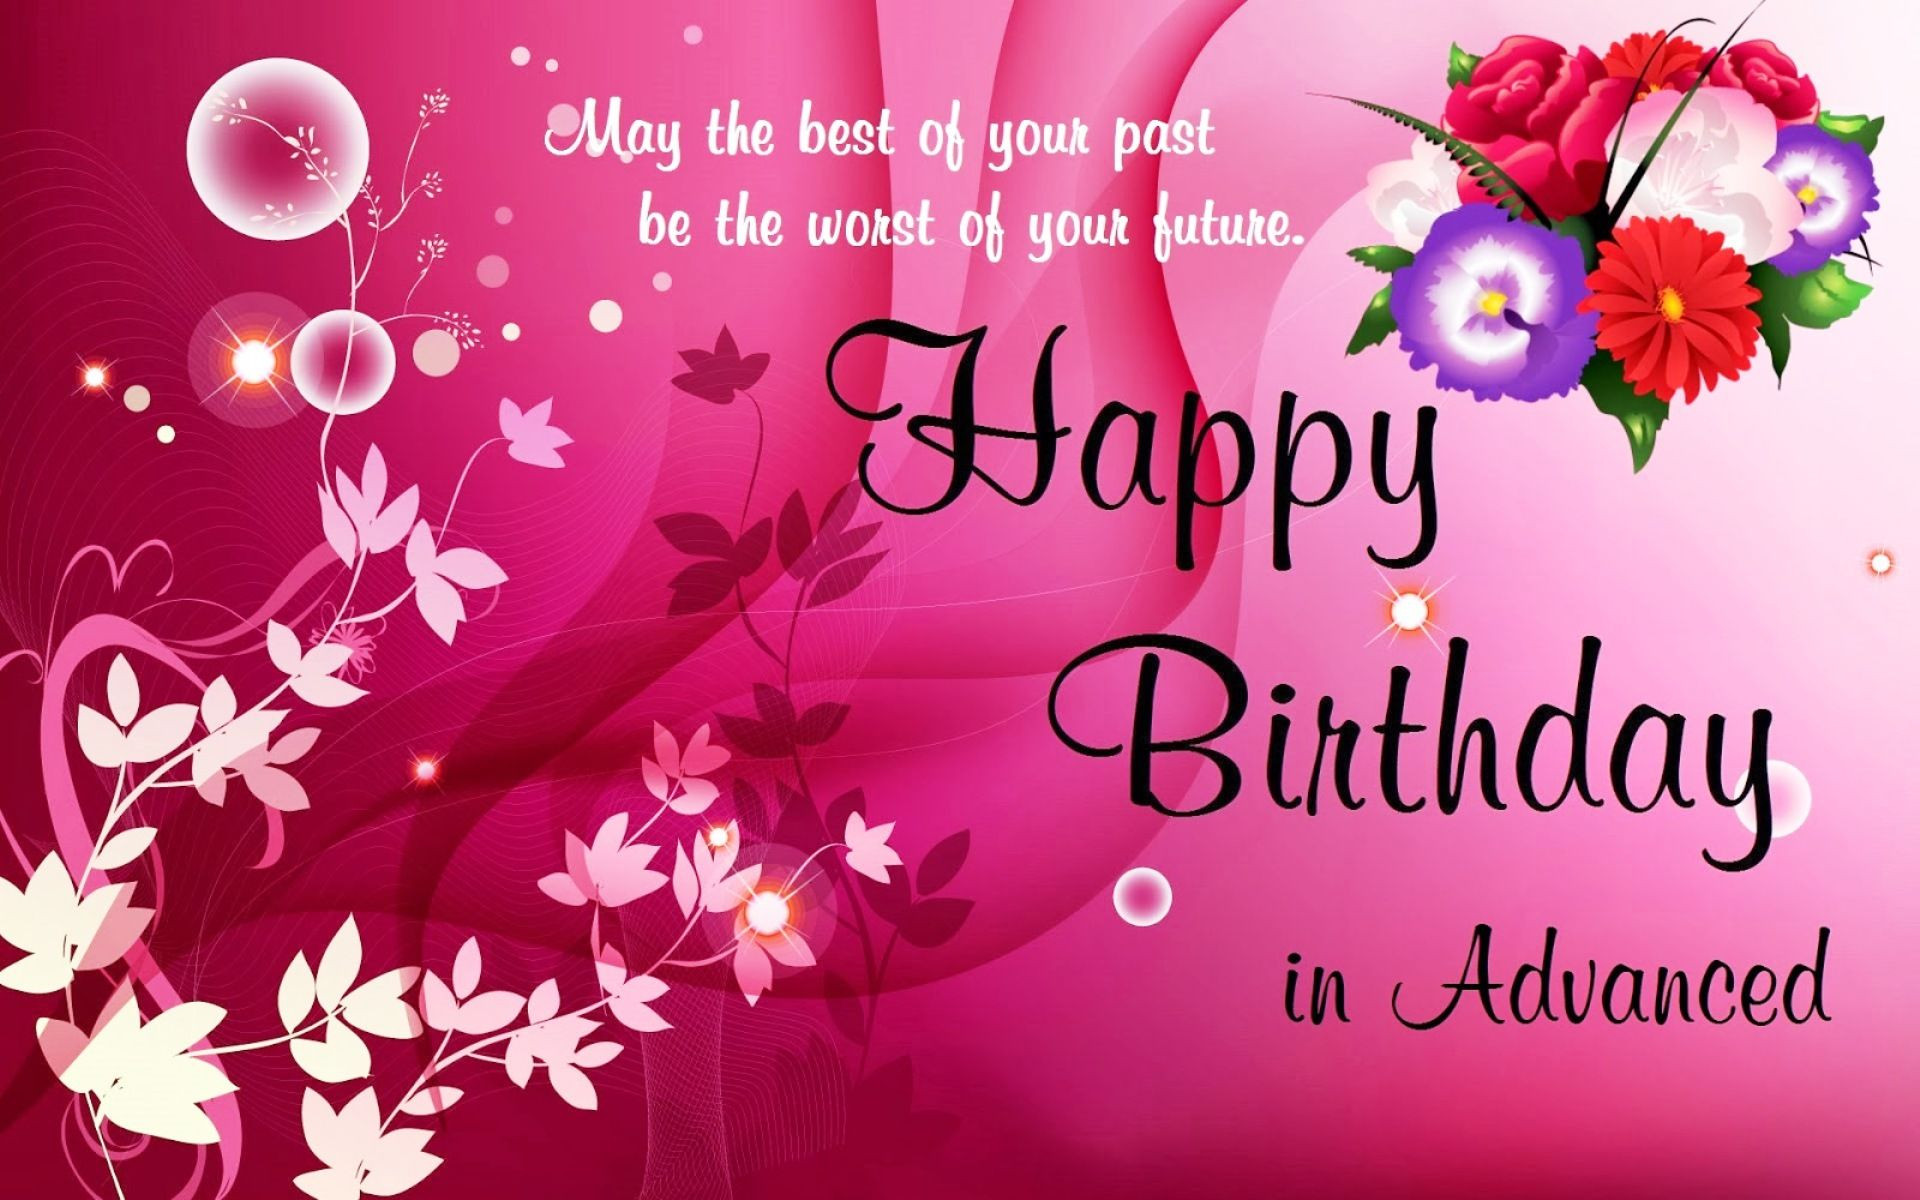 Happy Birthday Wishes Images Free Download
 Happy Birthday free with wishes